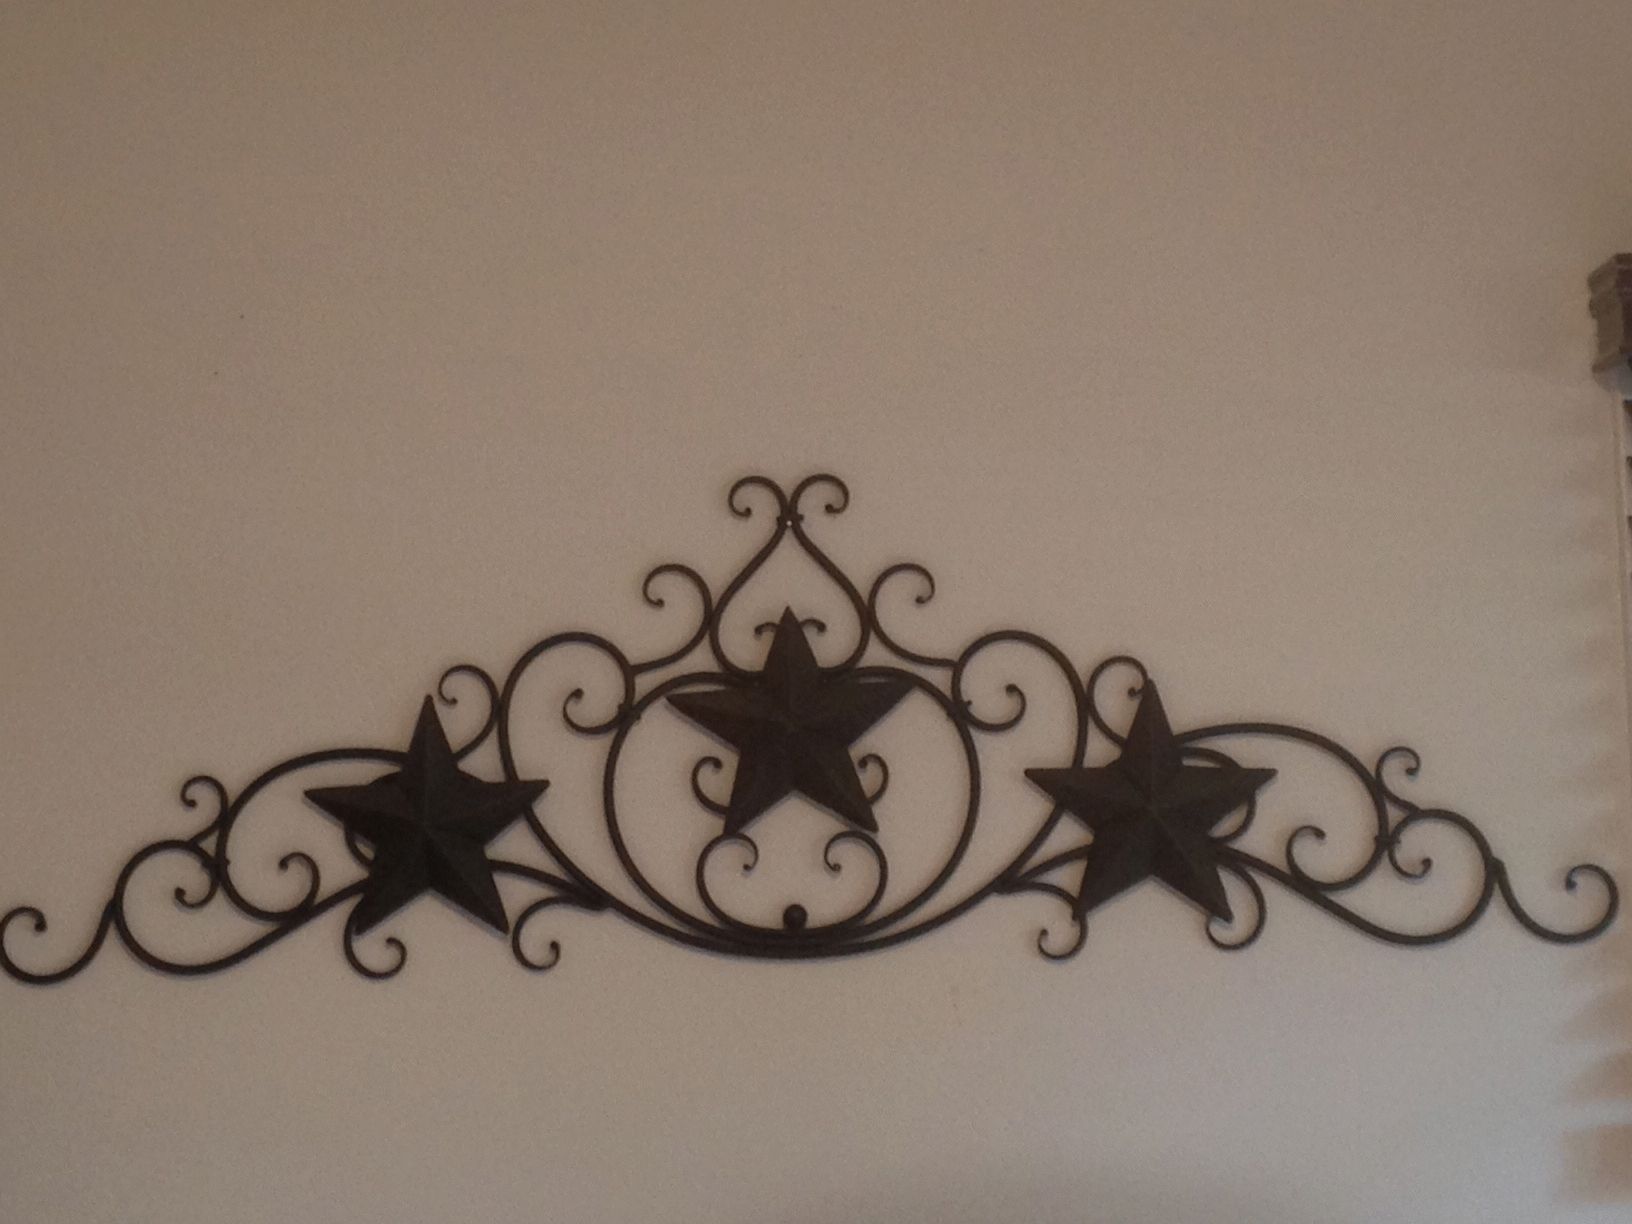 Well Known Western Texas Star Metal Scroll Wall Art With Regard To Metal Scroll Wall Art (View 9 of 20)